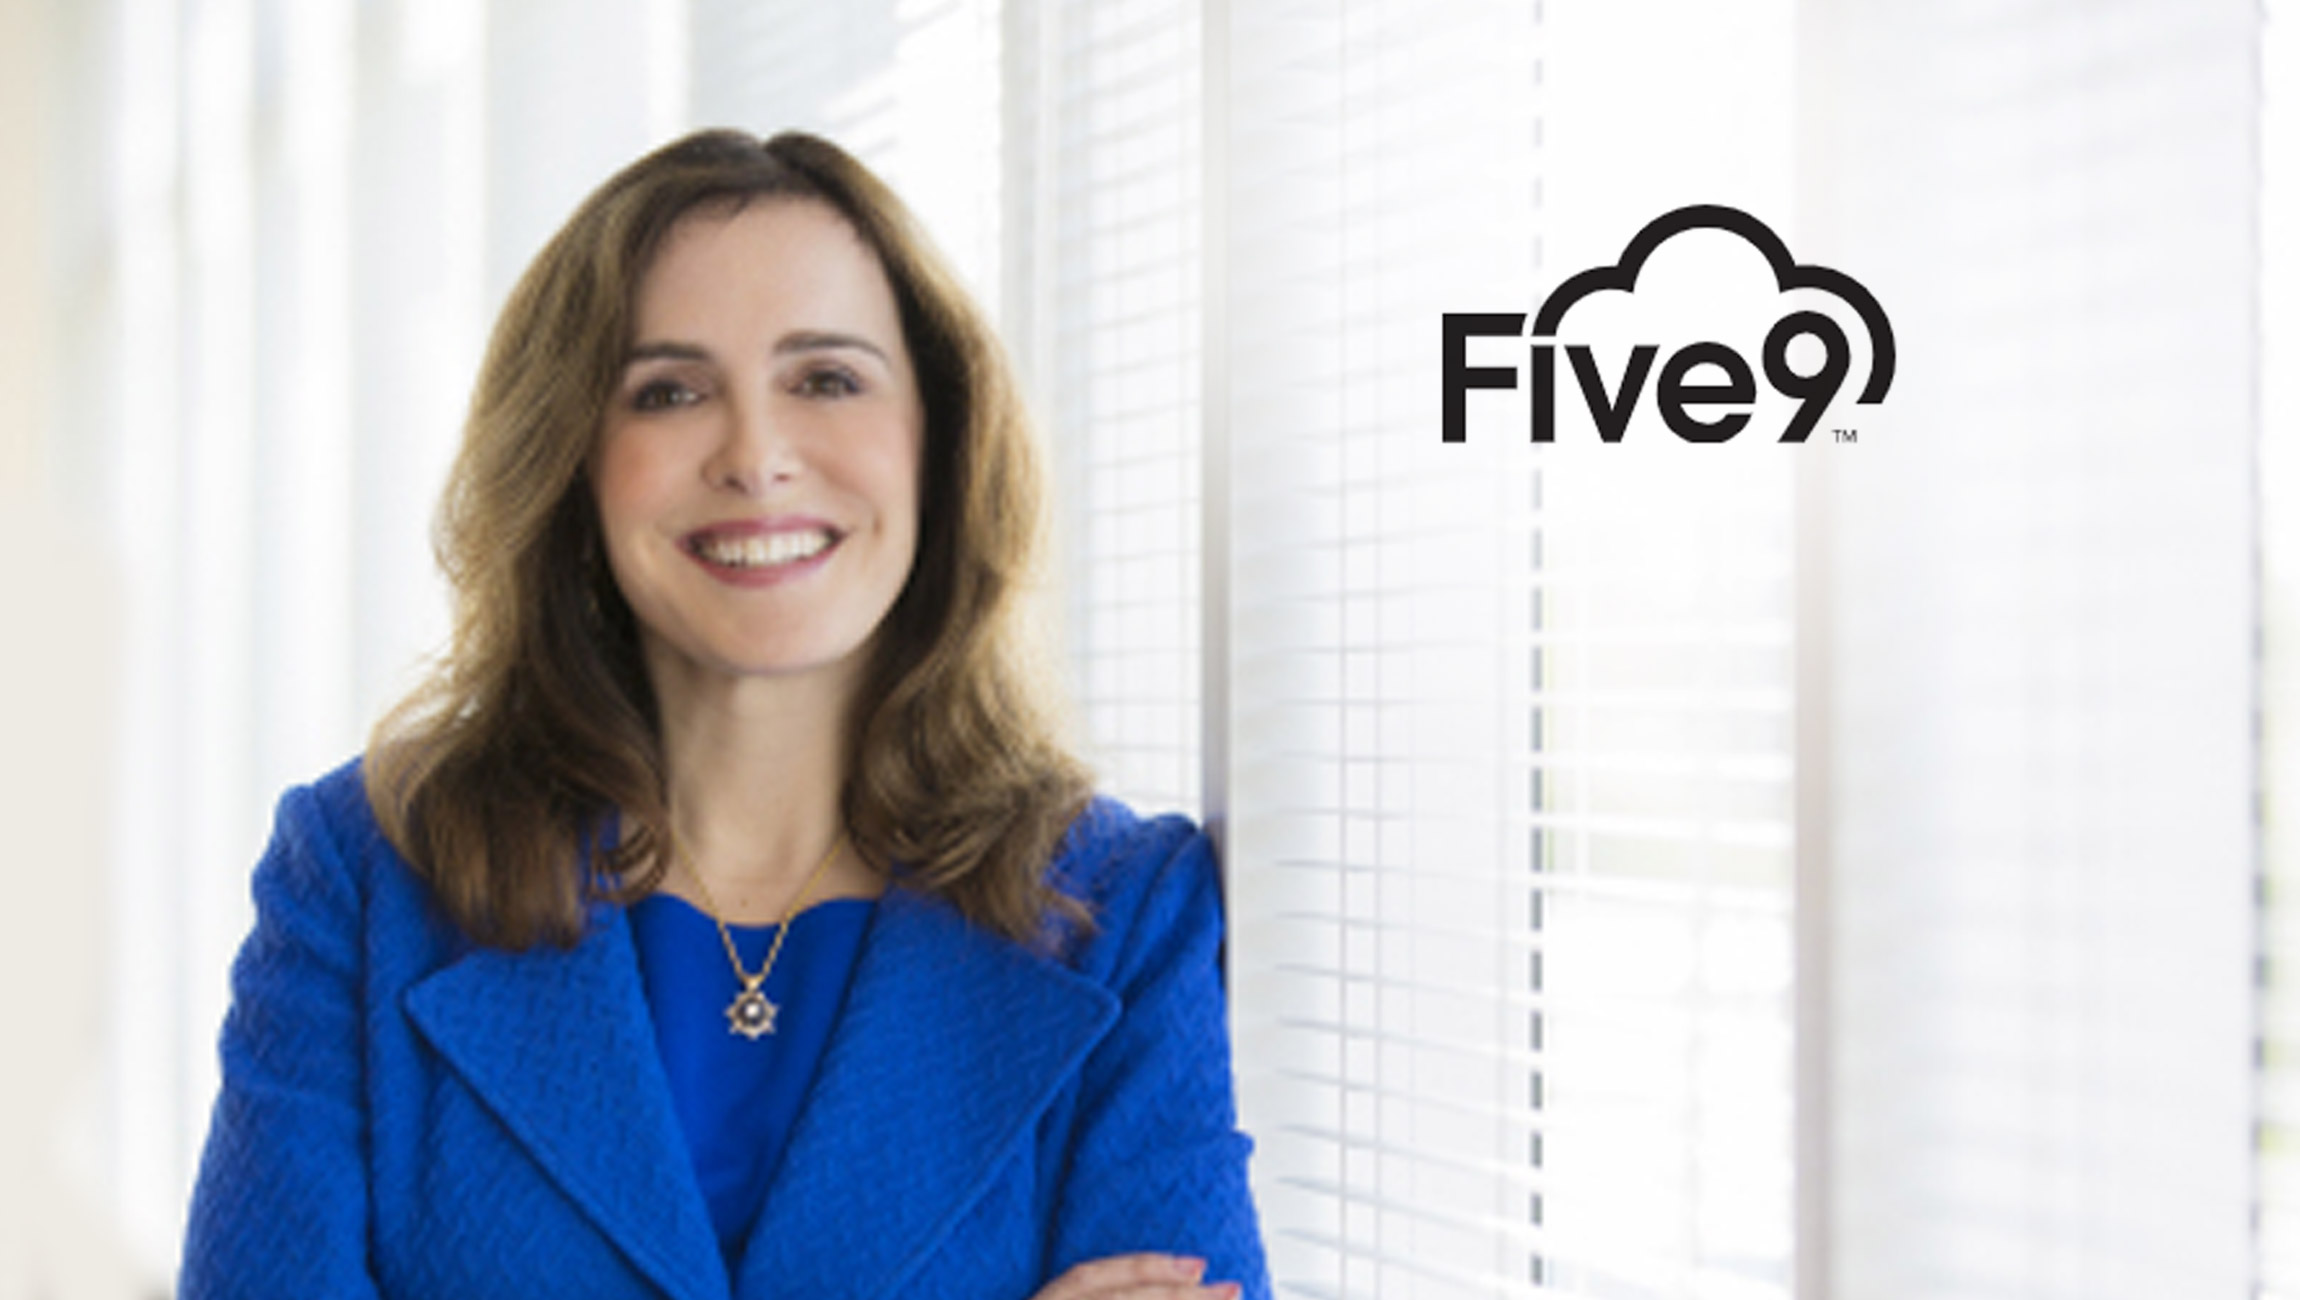 Influential SaaS Executive Ana Pinczuk Joins Five9 Board of Directors